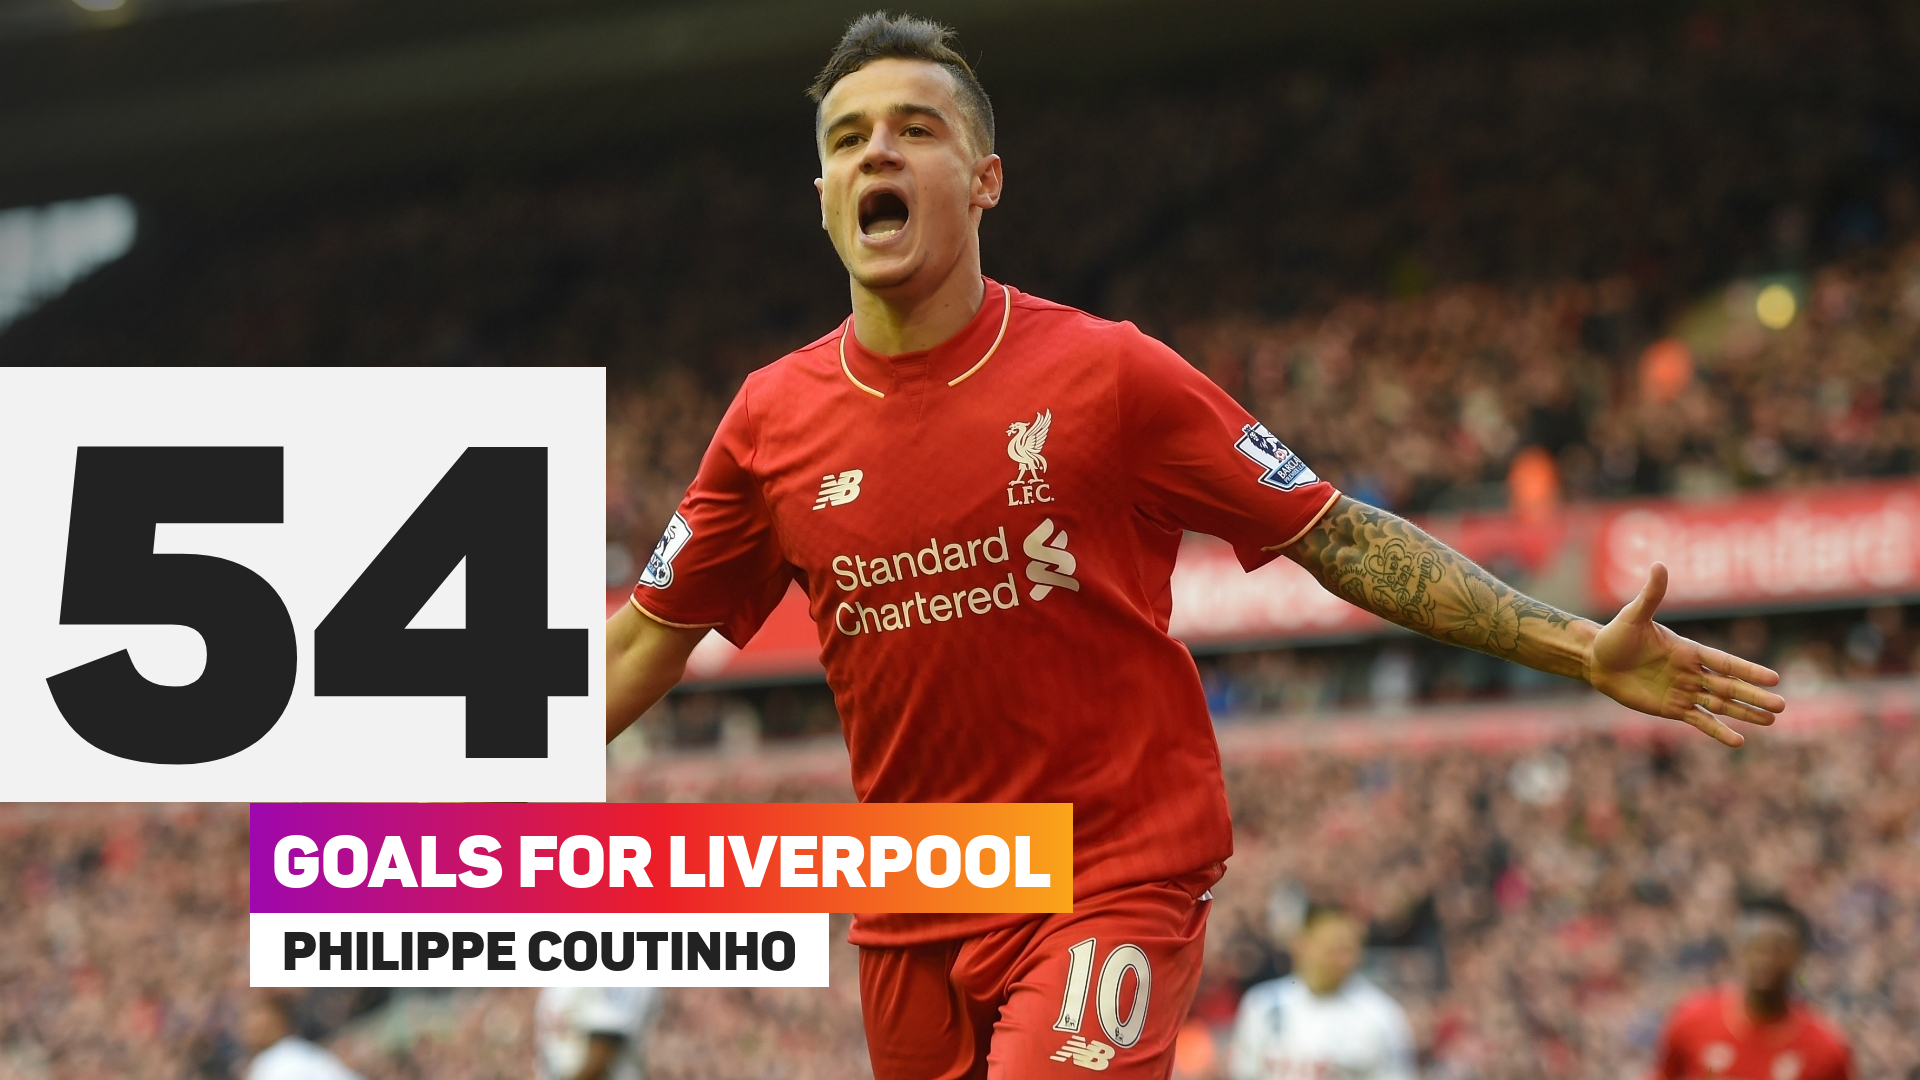 Philippe Coutinho goals for Liverpool